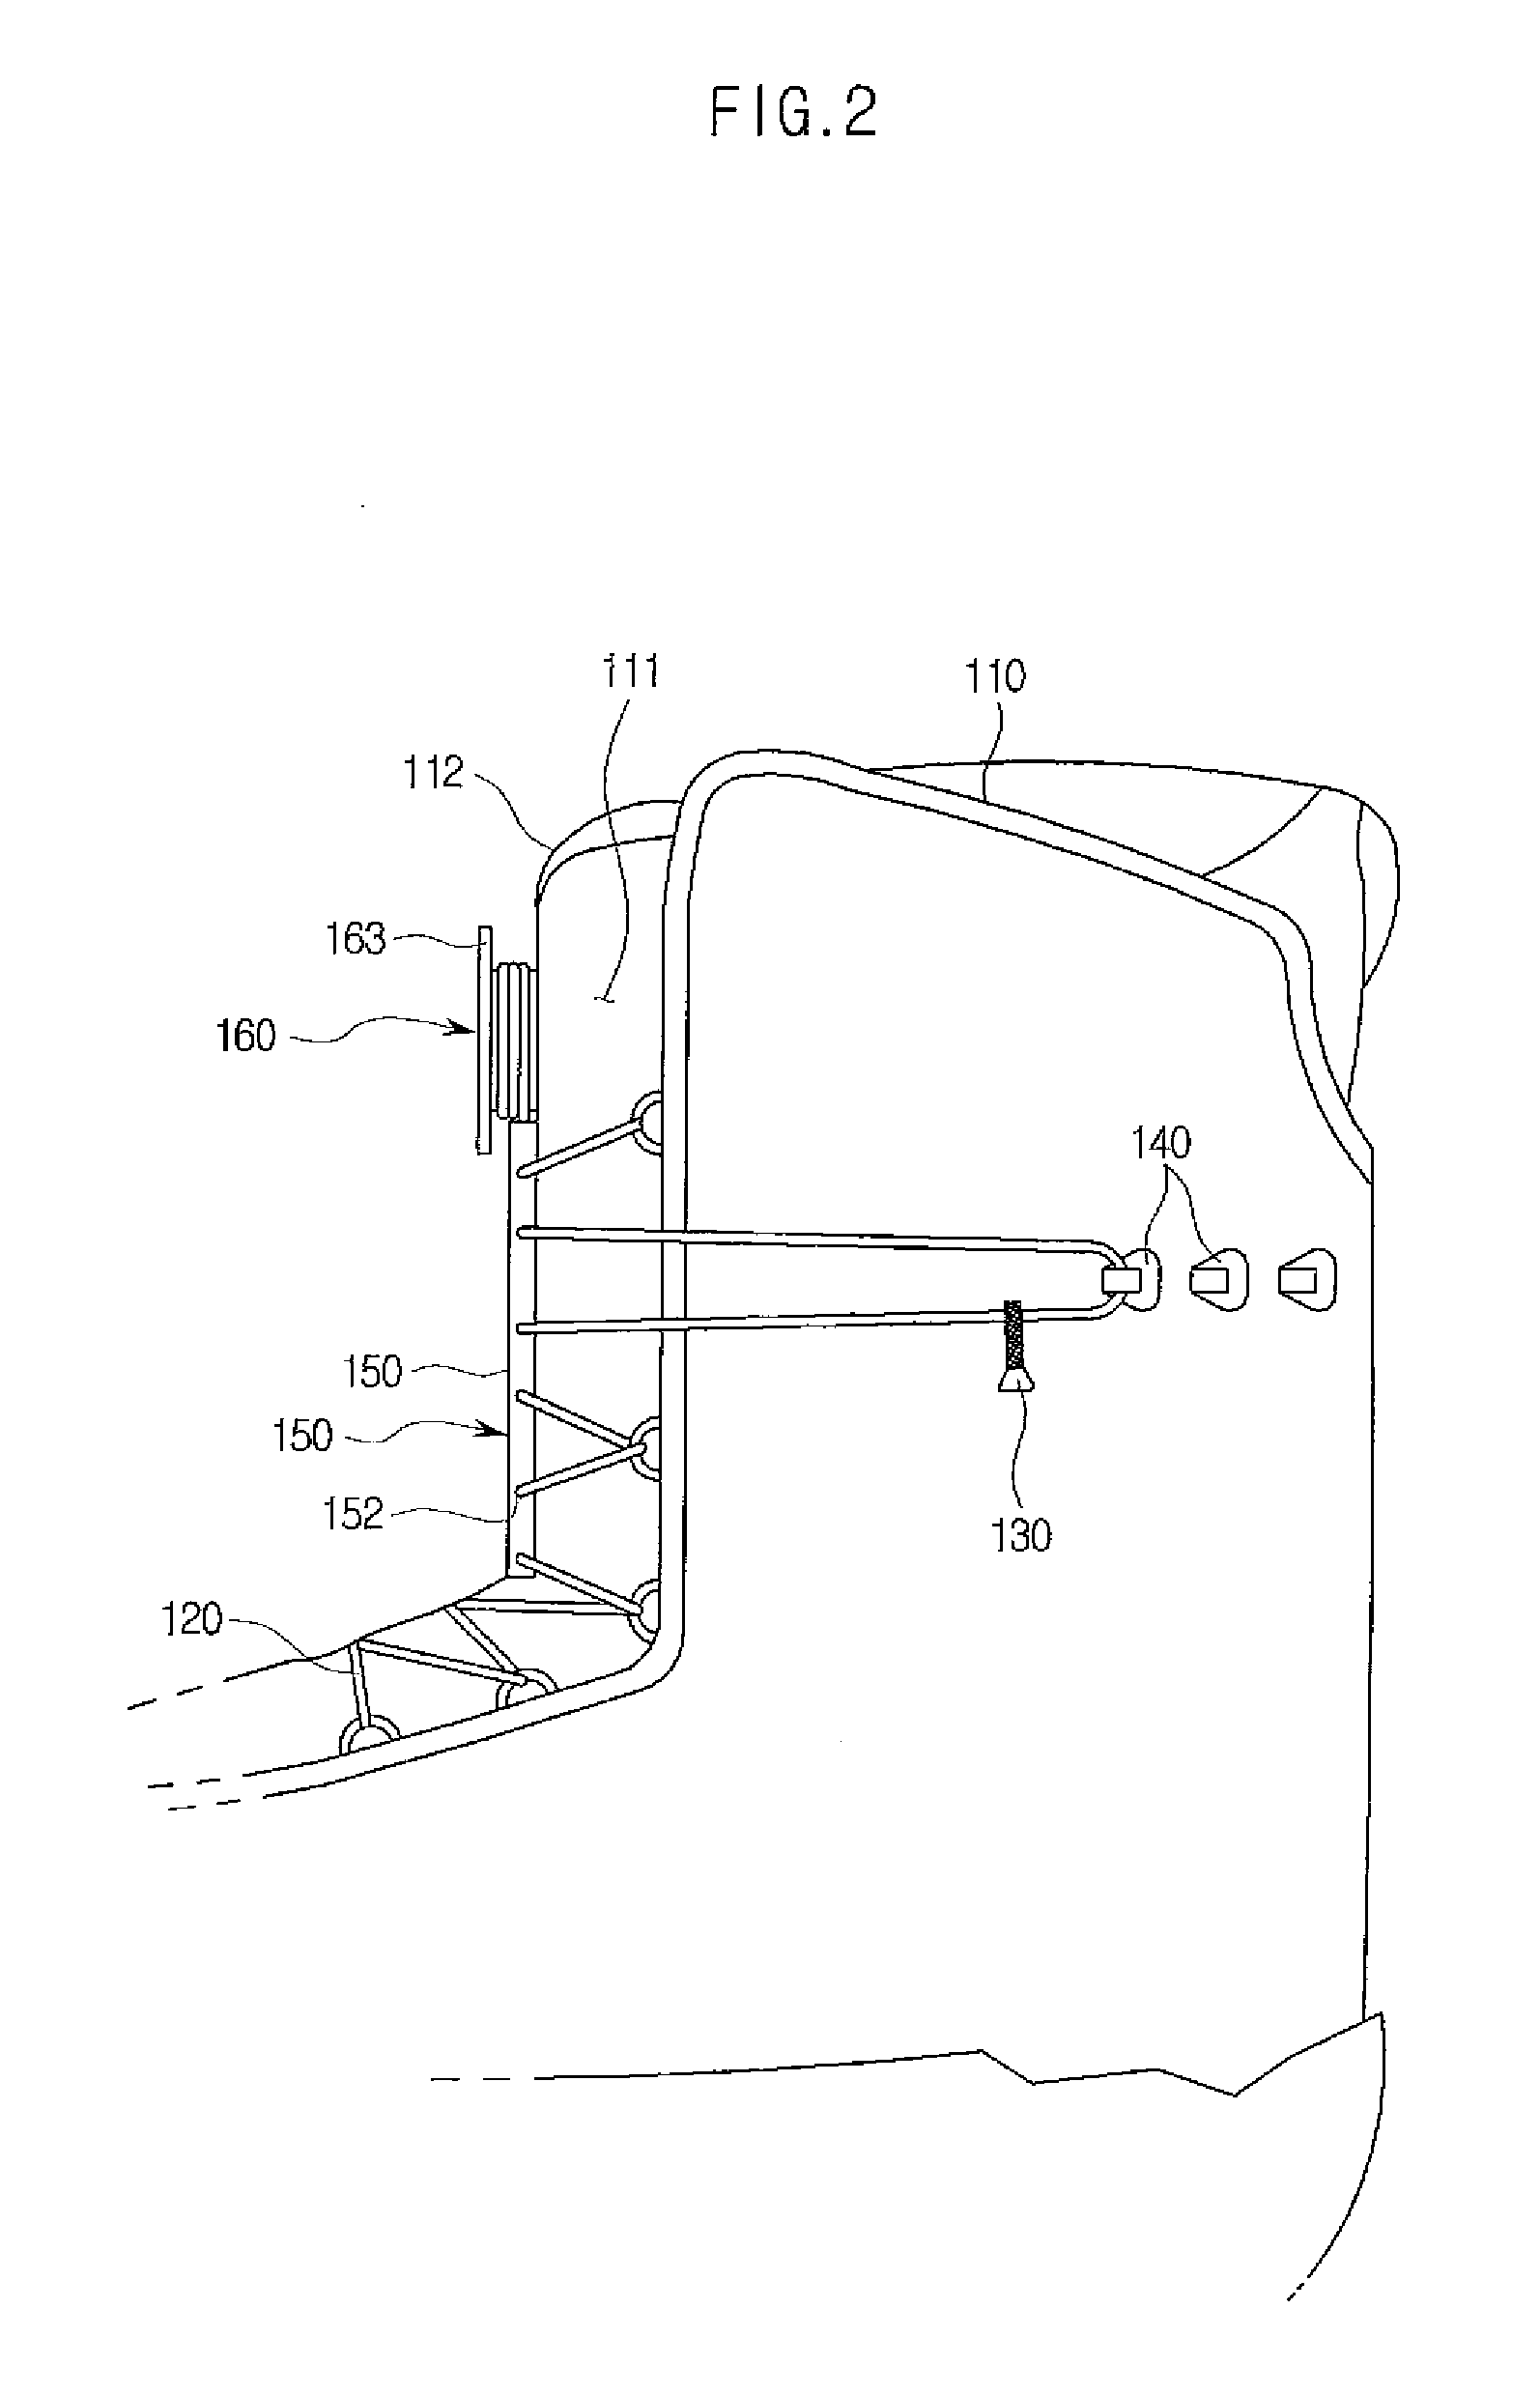 Device for Tightening Shoelace